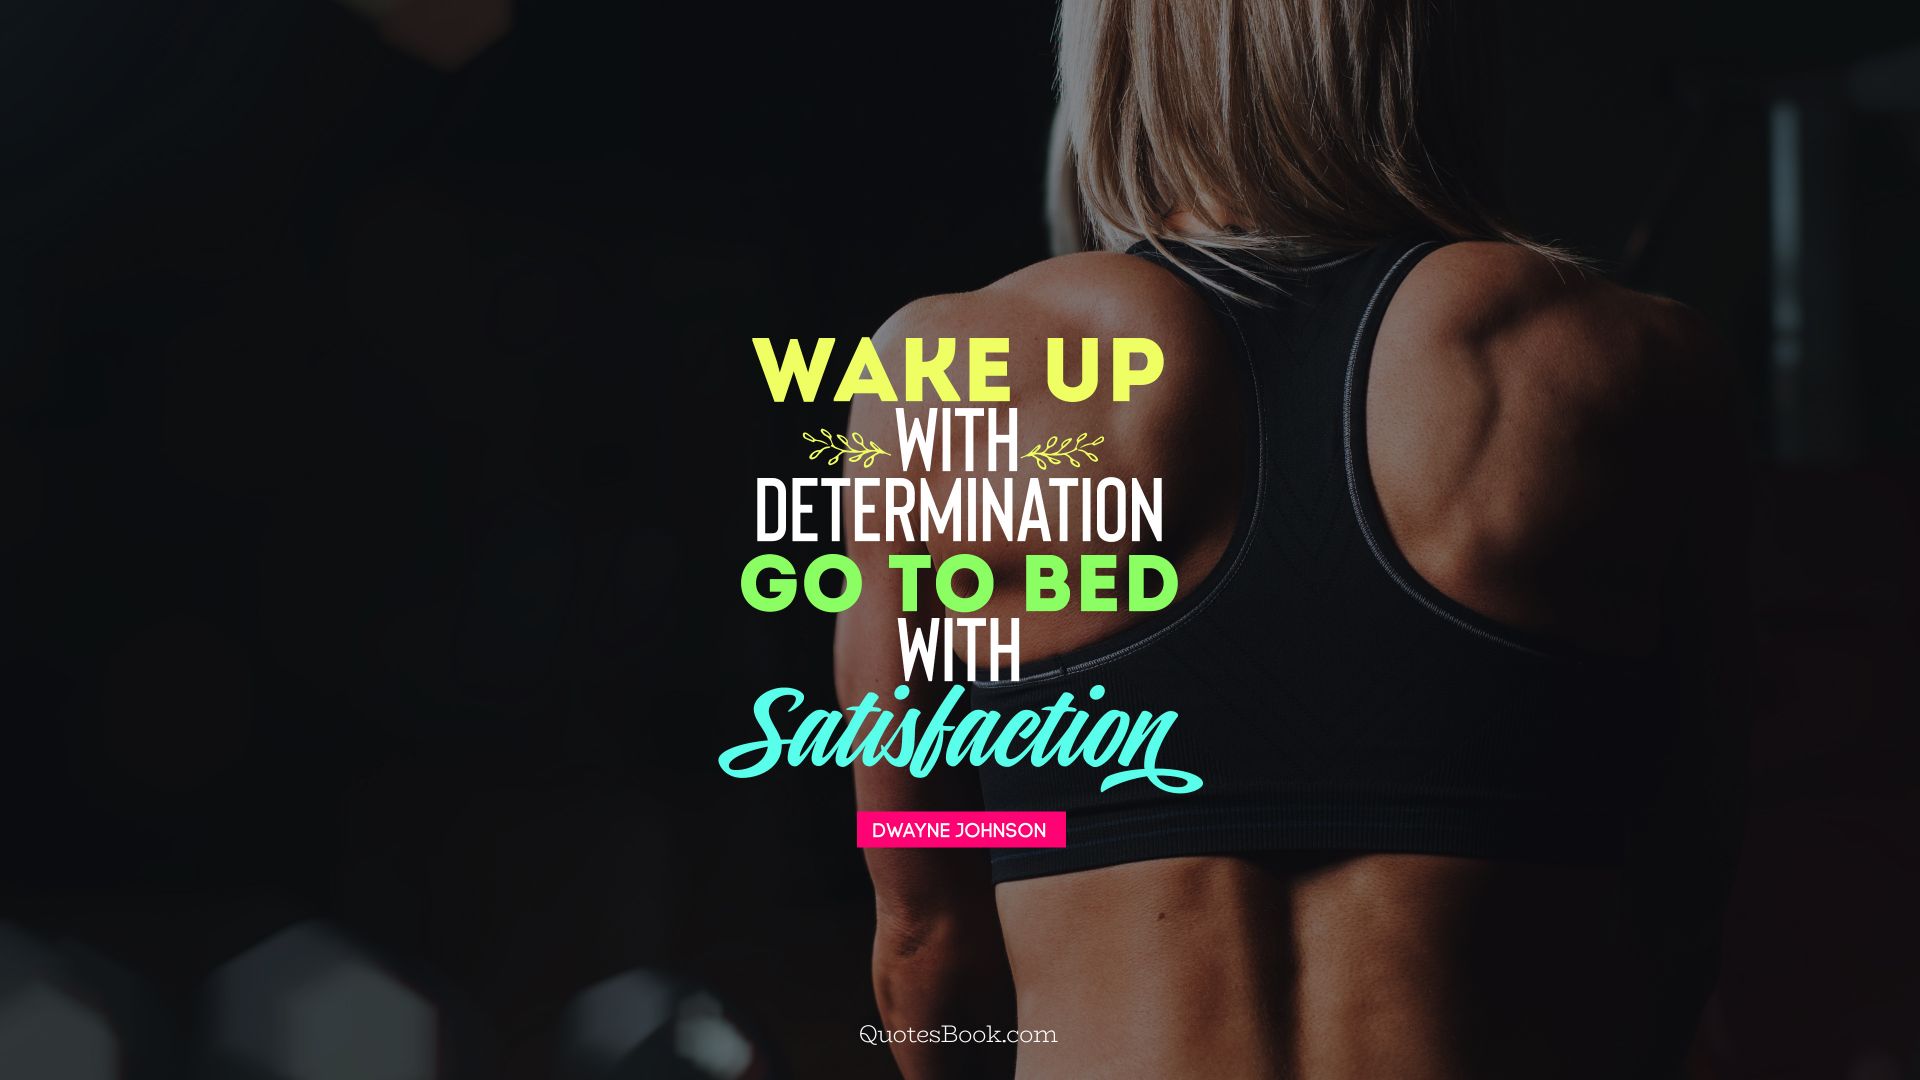 Wake up with determination, go to bed with satisfaction. - Quote by Dwayne Johnson